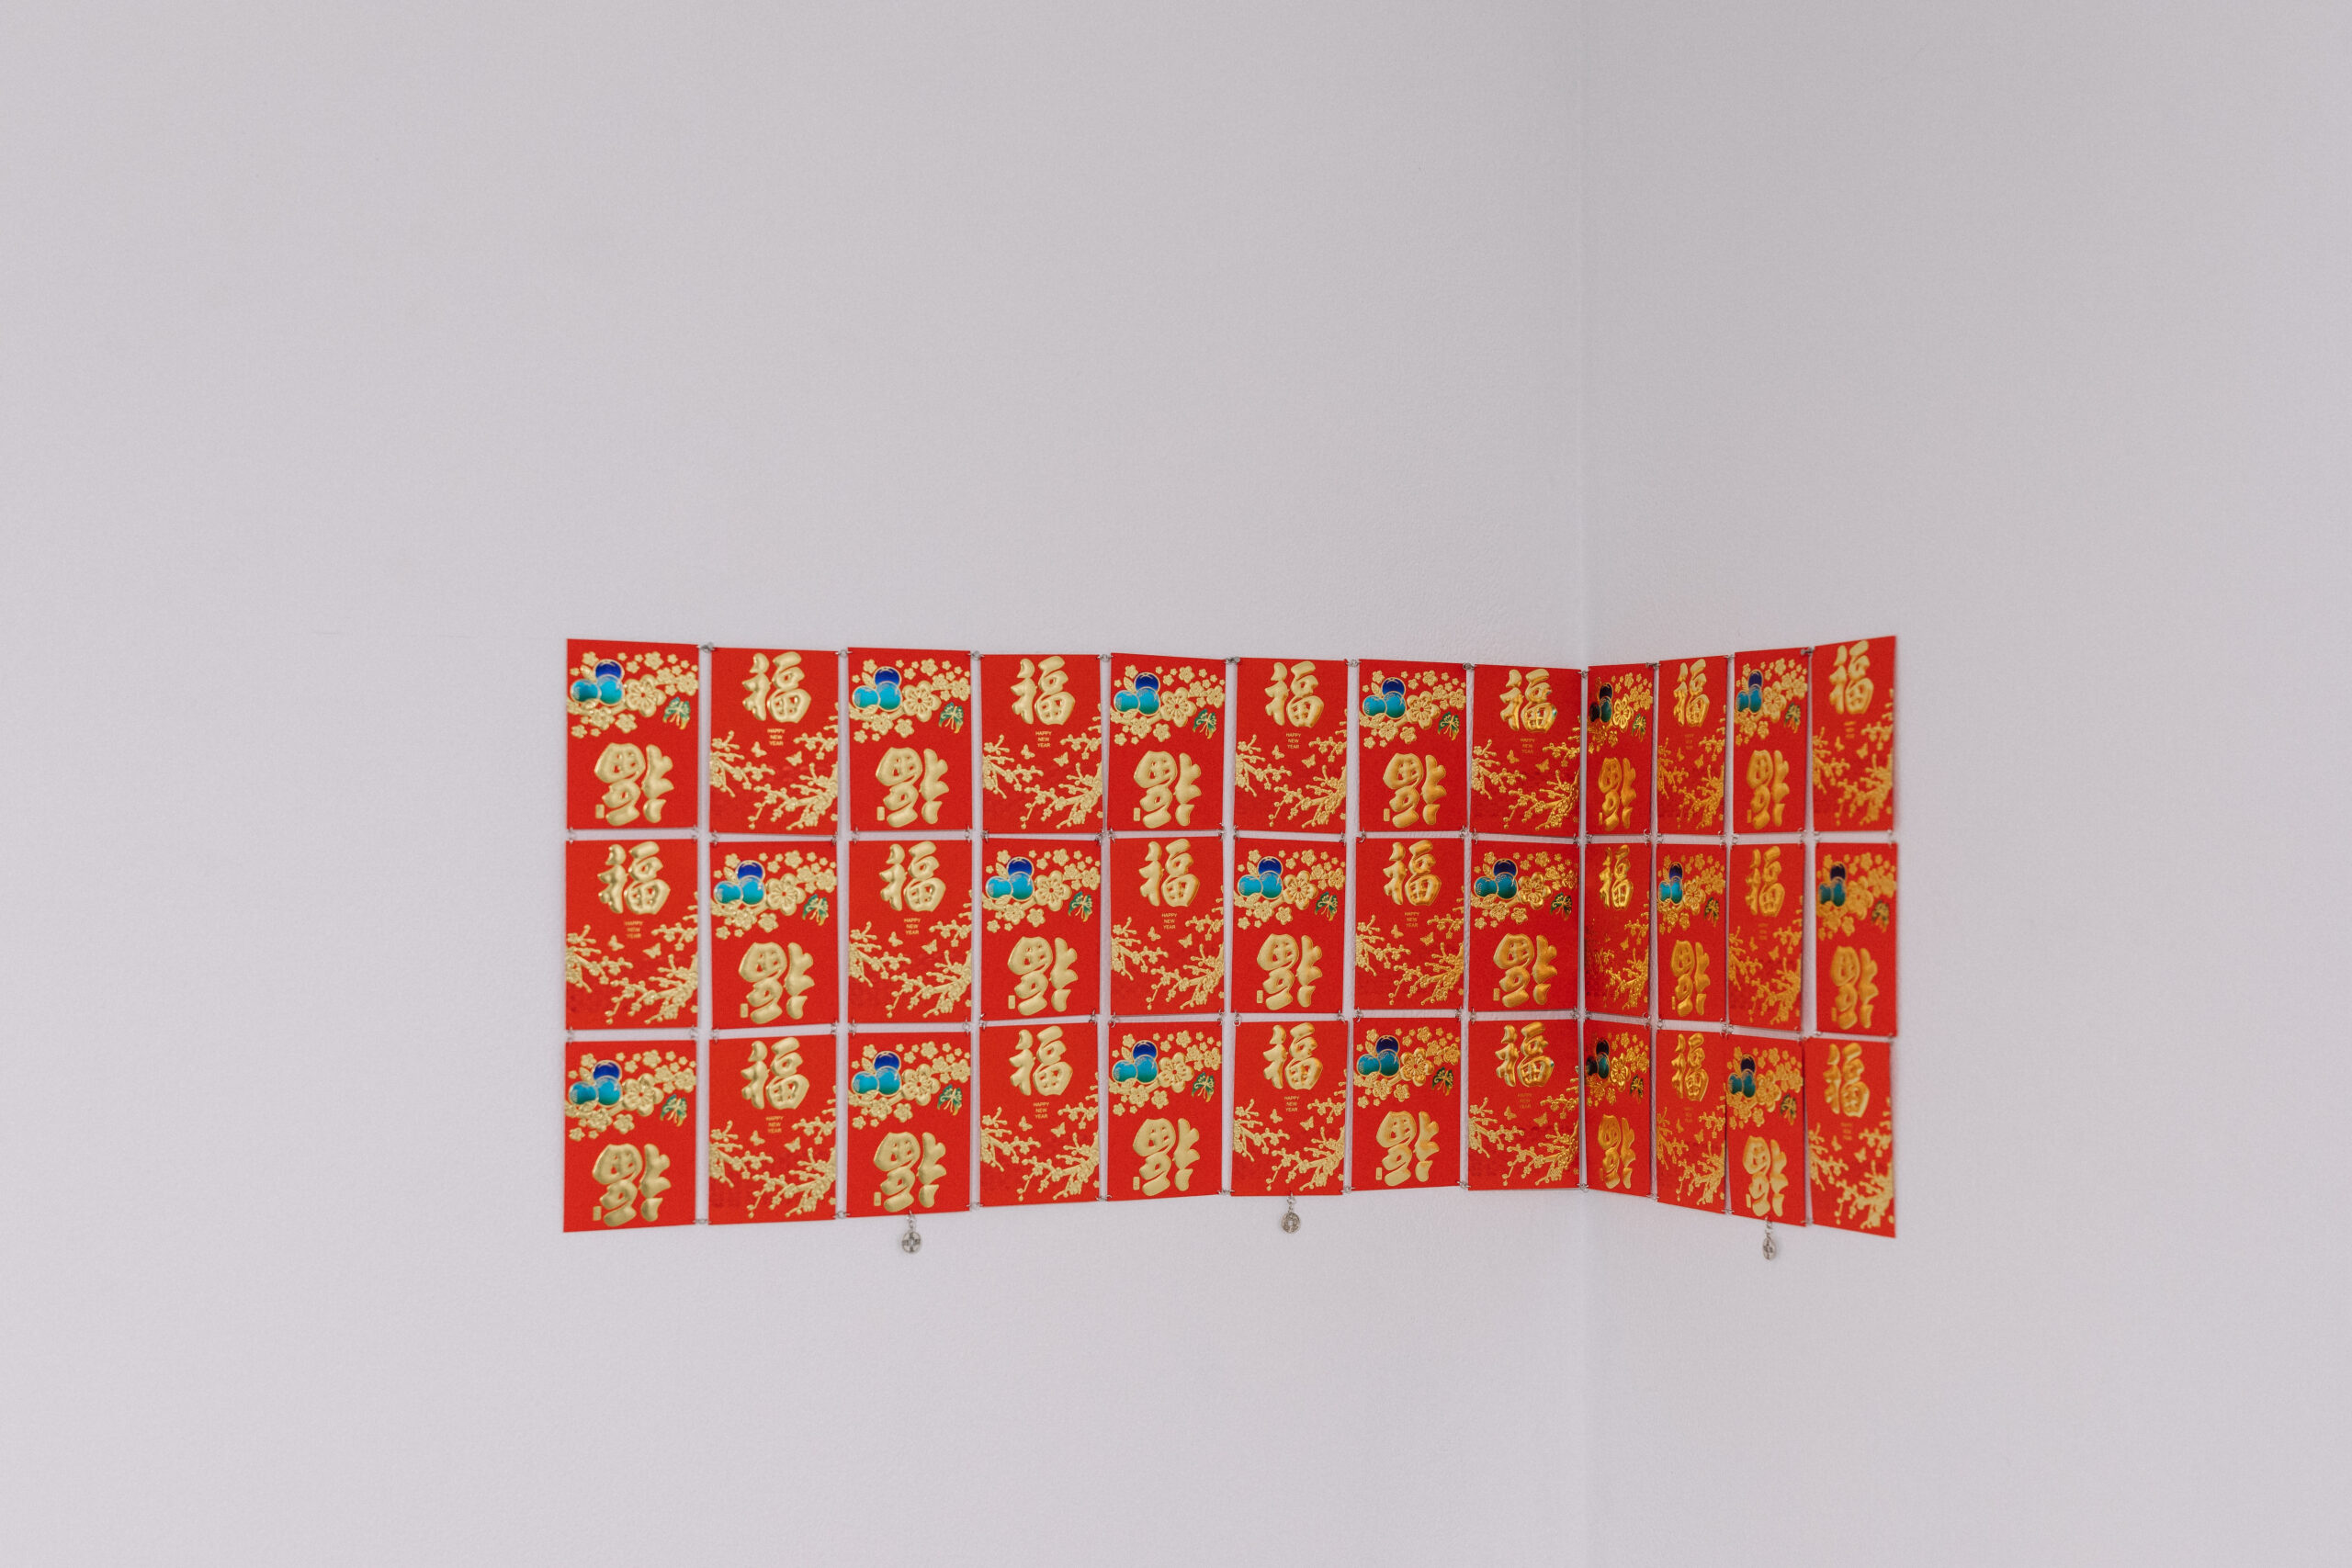 Installation documentation of a 3x 12 grid of paper Hong Bao.